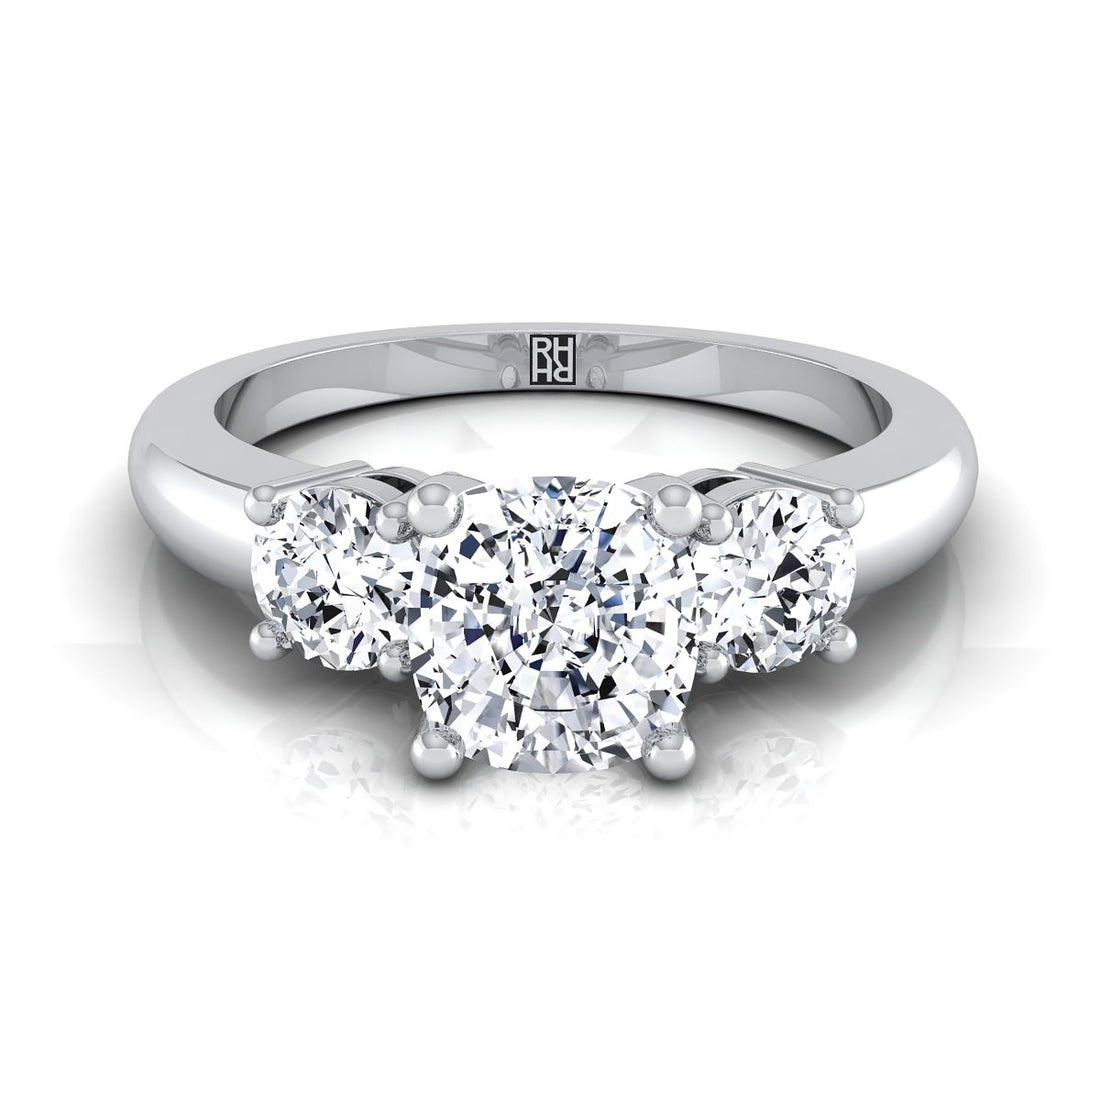 Why Couples Desire to Own Radiant Cut Diamond Rings